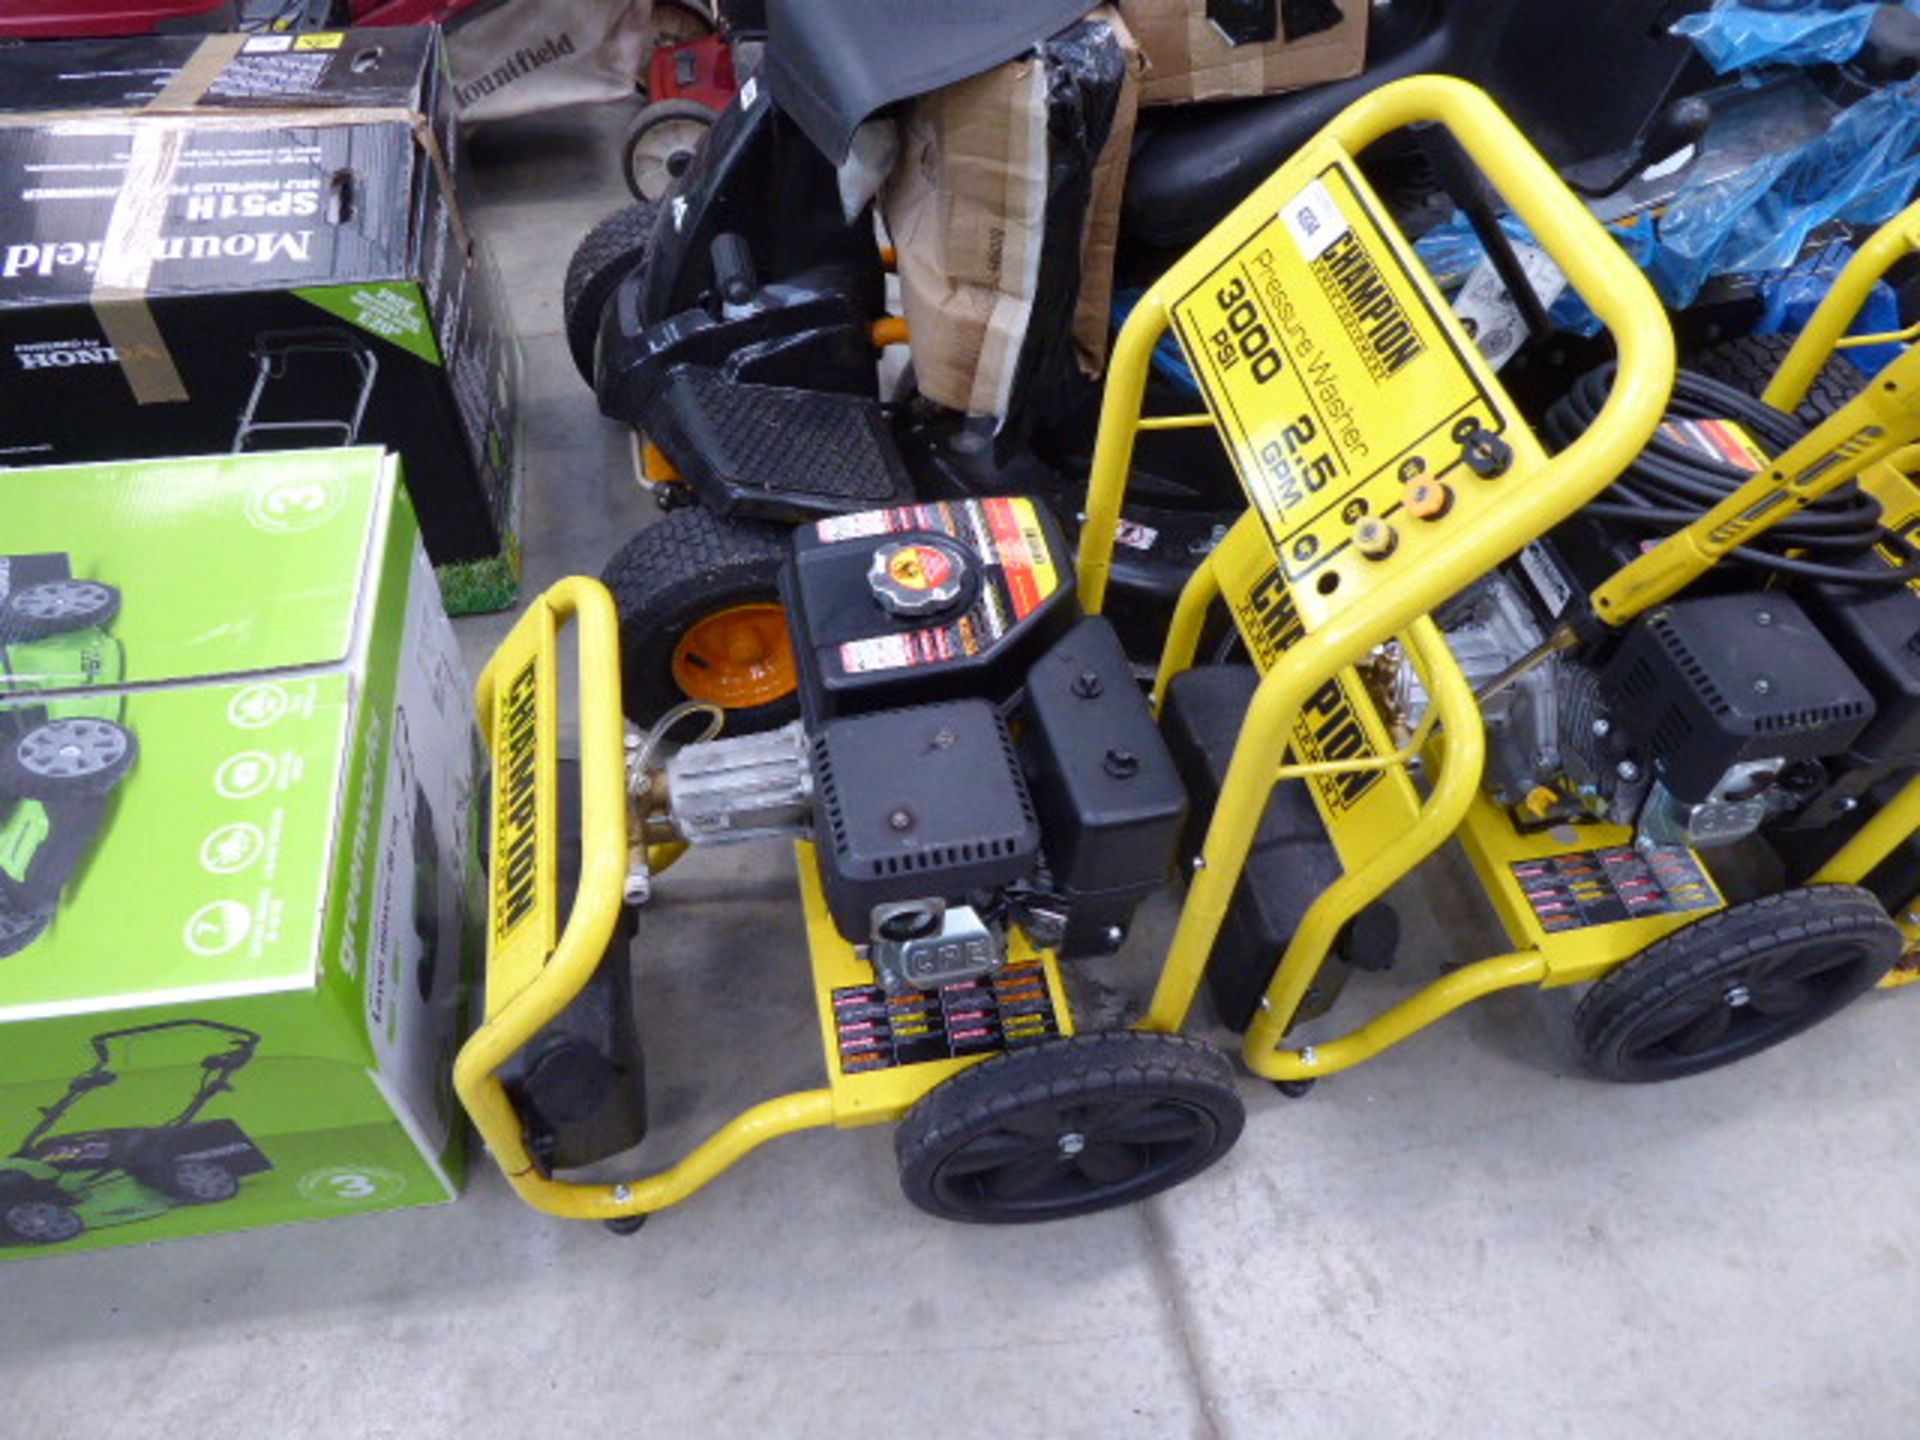 Champion petrol powered pressure washer (no lance or hose)